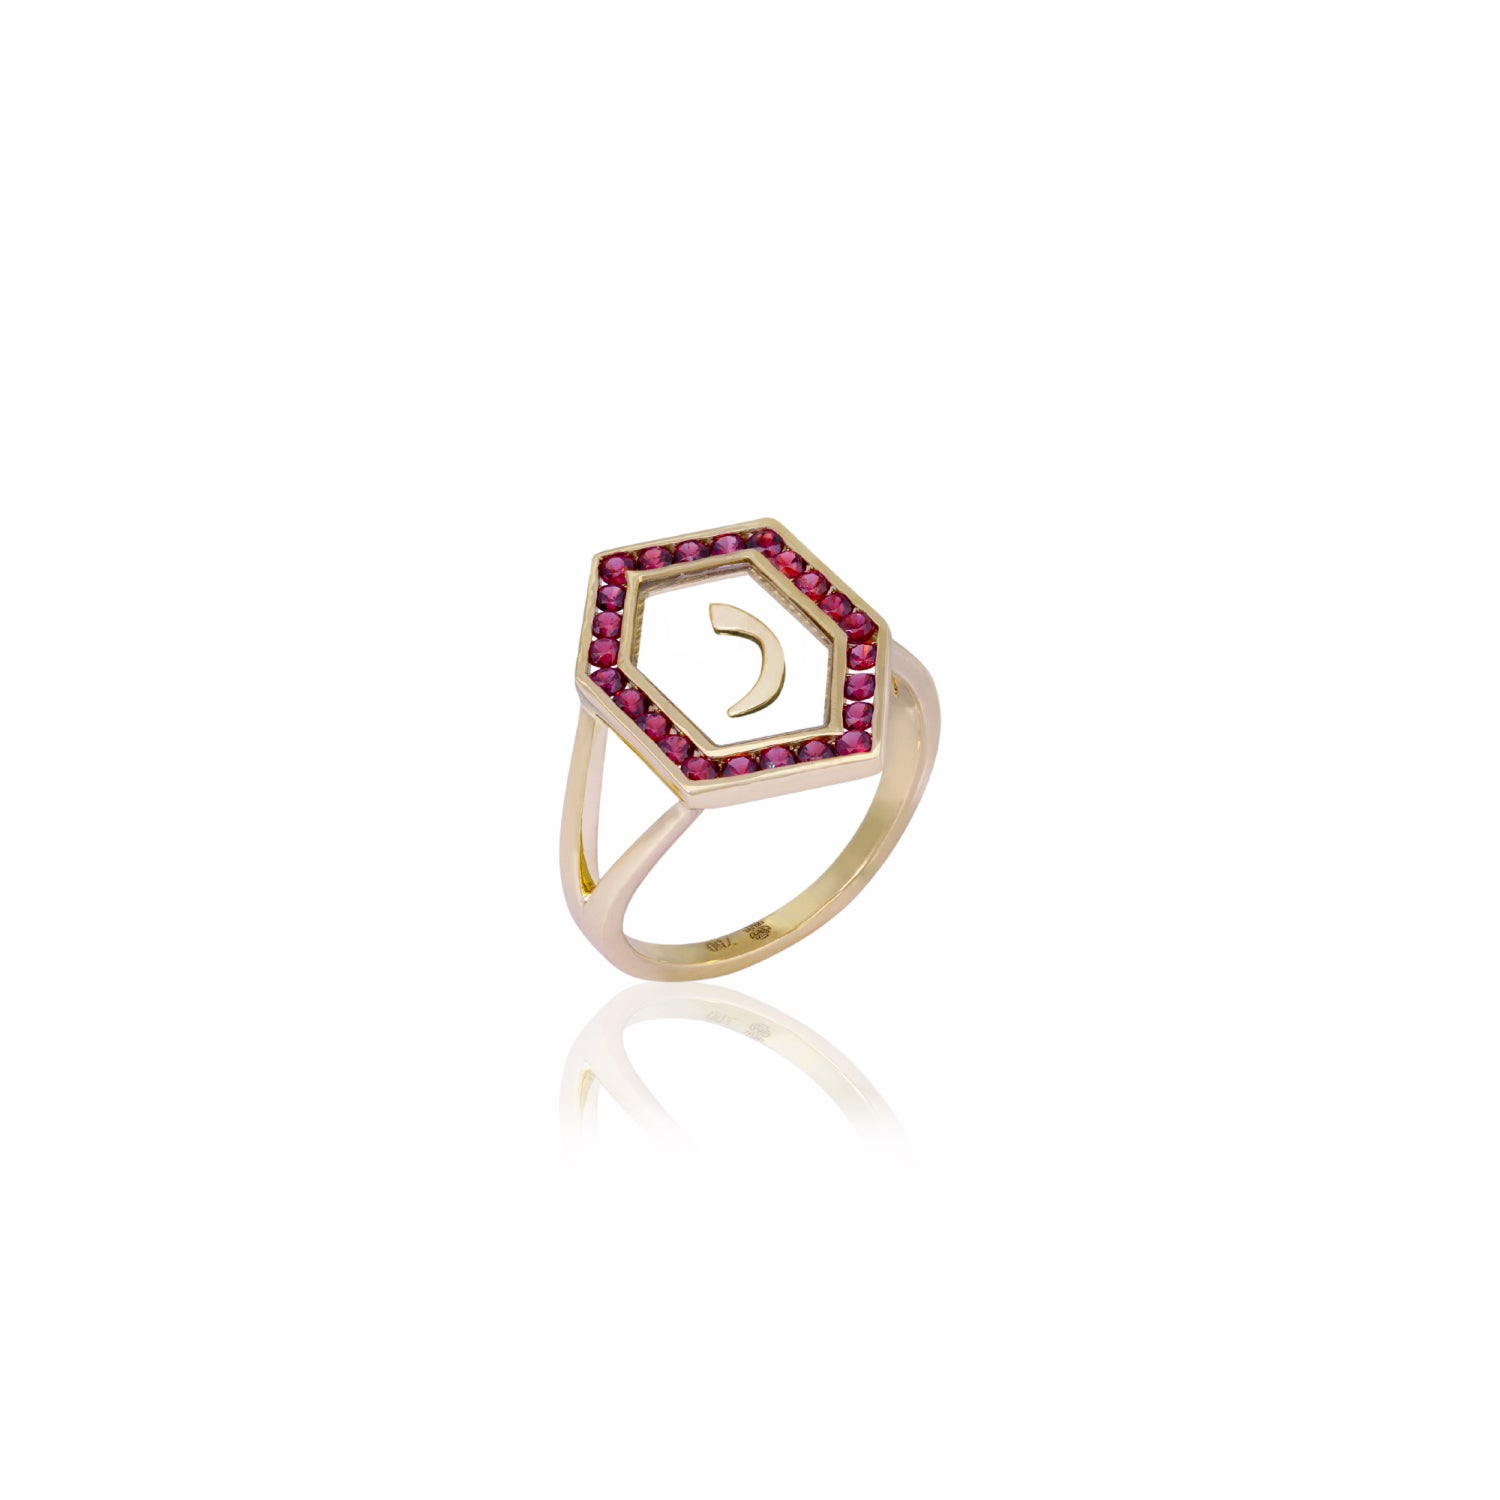 Qamoos 1.0 Letter ر Ruby Ring in Yellow Gold